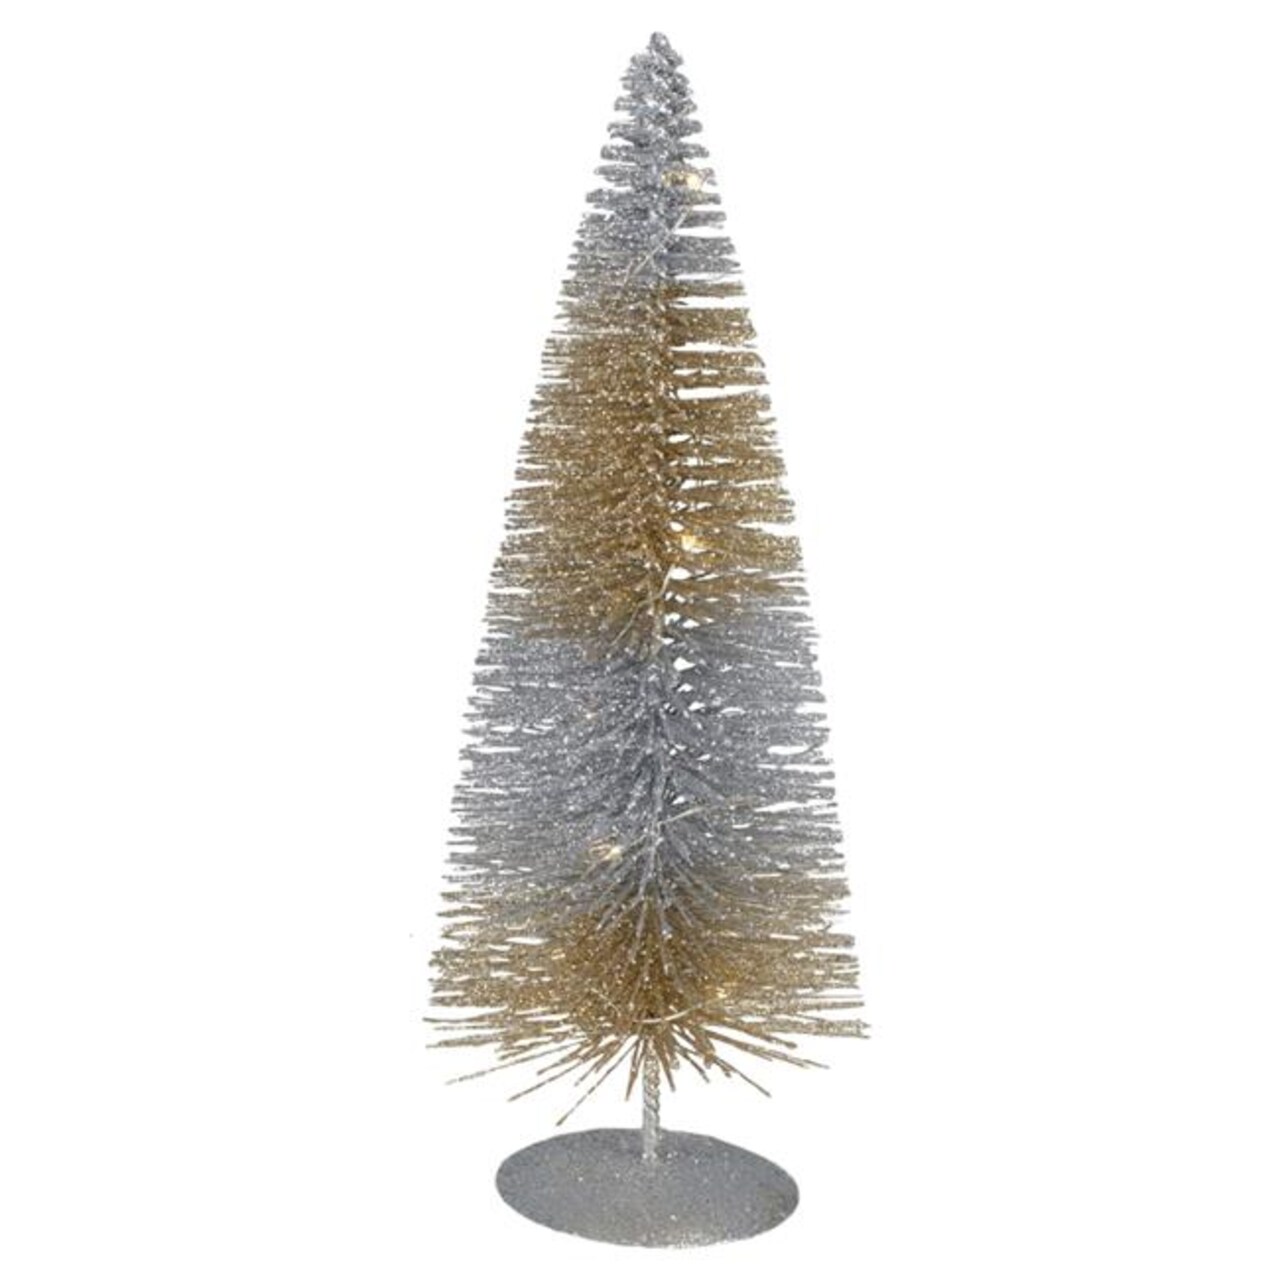 NorthLight 34314446 10 in. LED Lighted Sisal Mini Christmas Tree, Silver &#x26; Gold - Warm White Lights